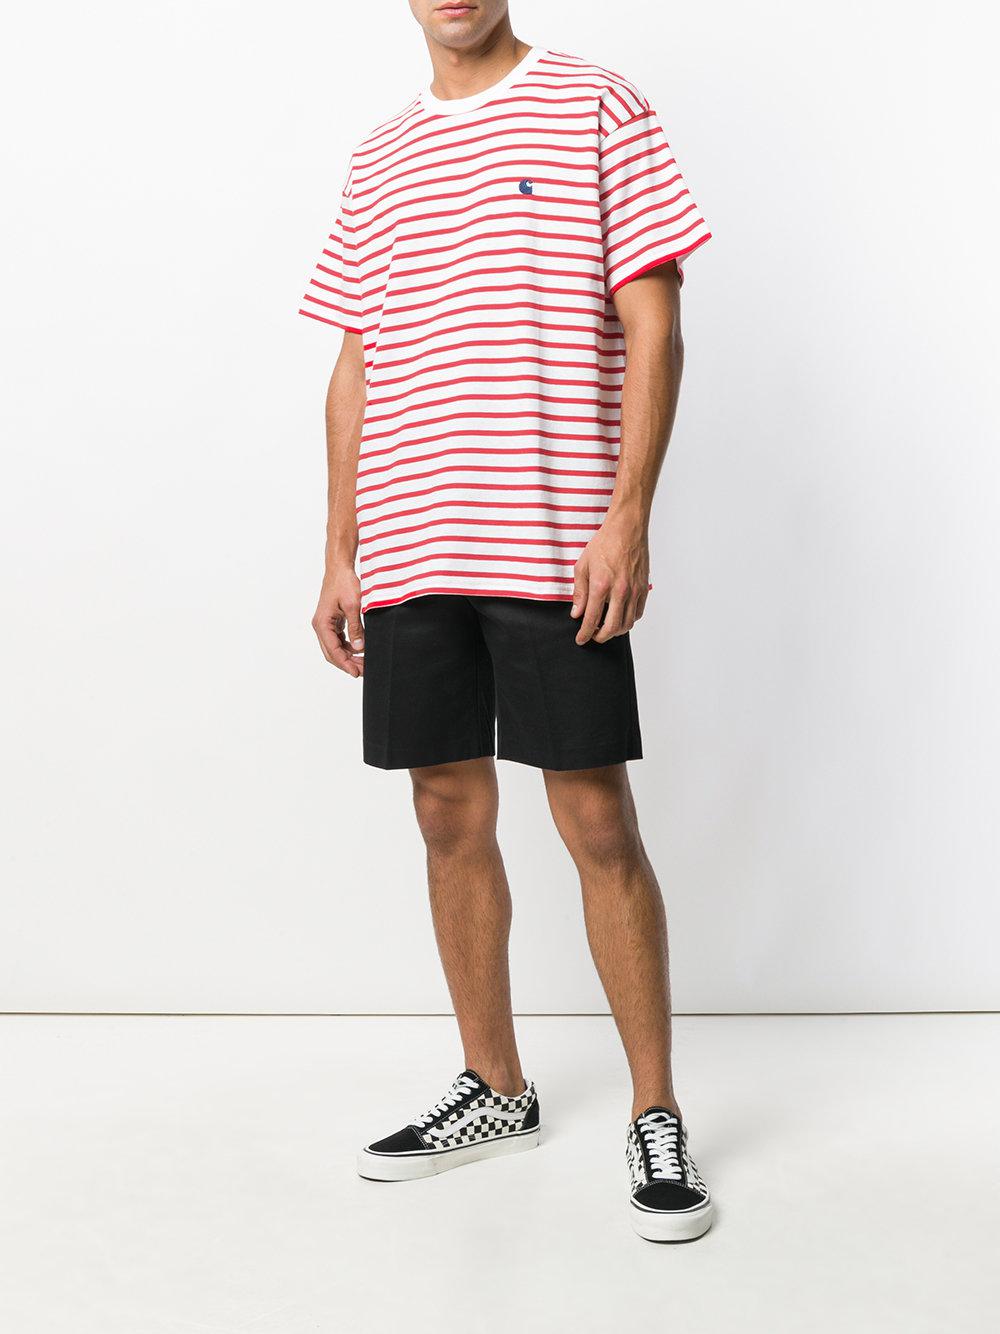 Carhartt Cotton Striped T-shirt in Red for Men | Lyst